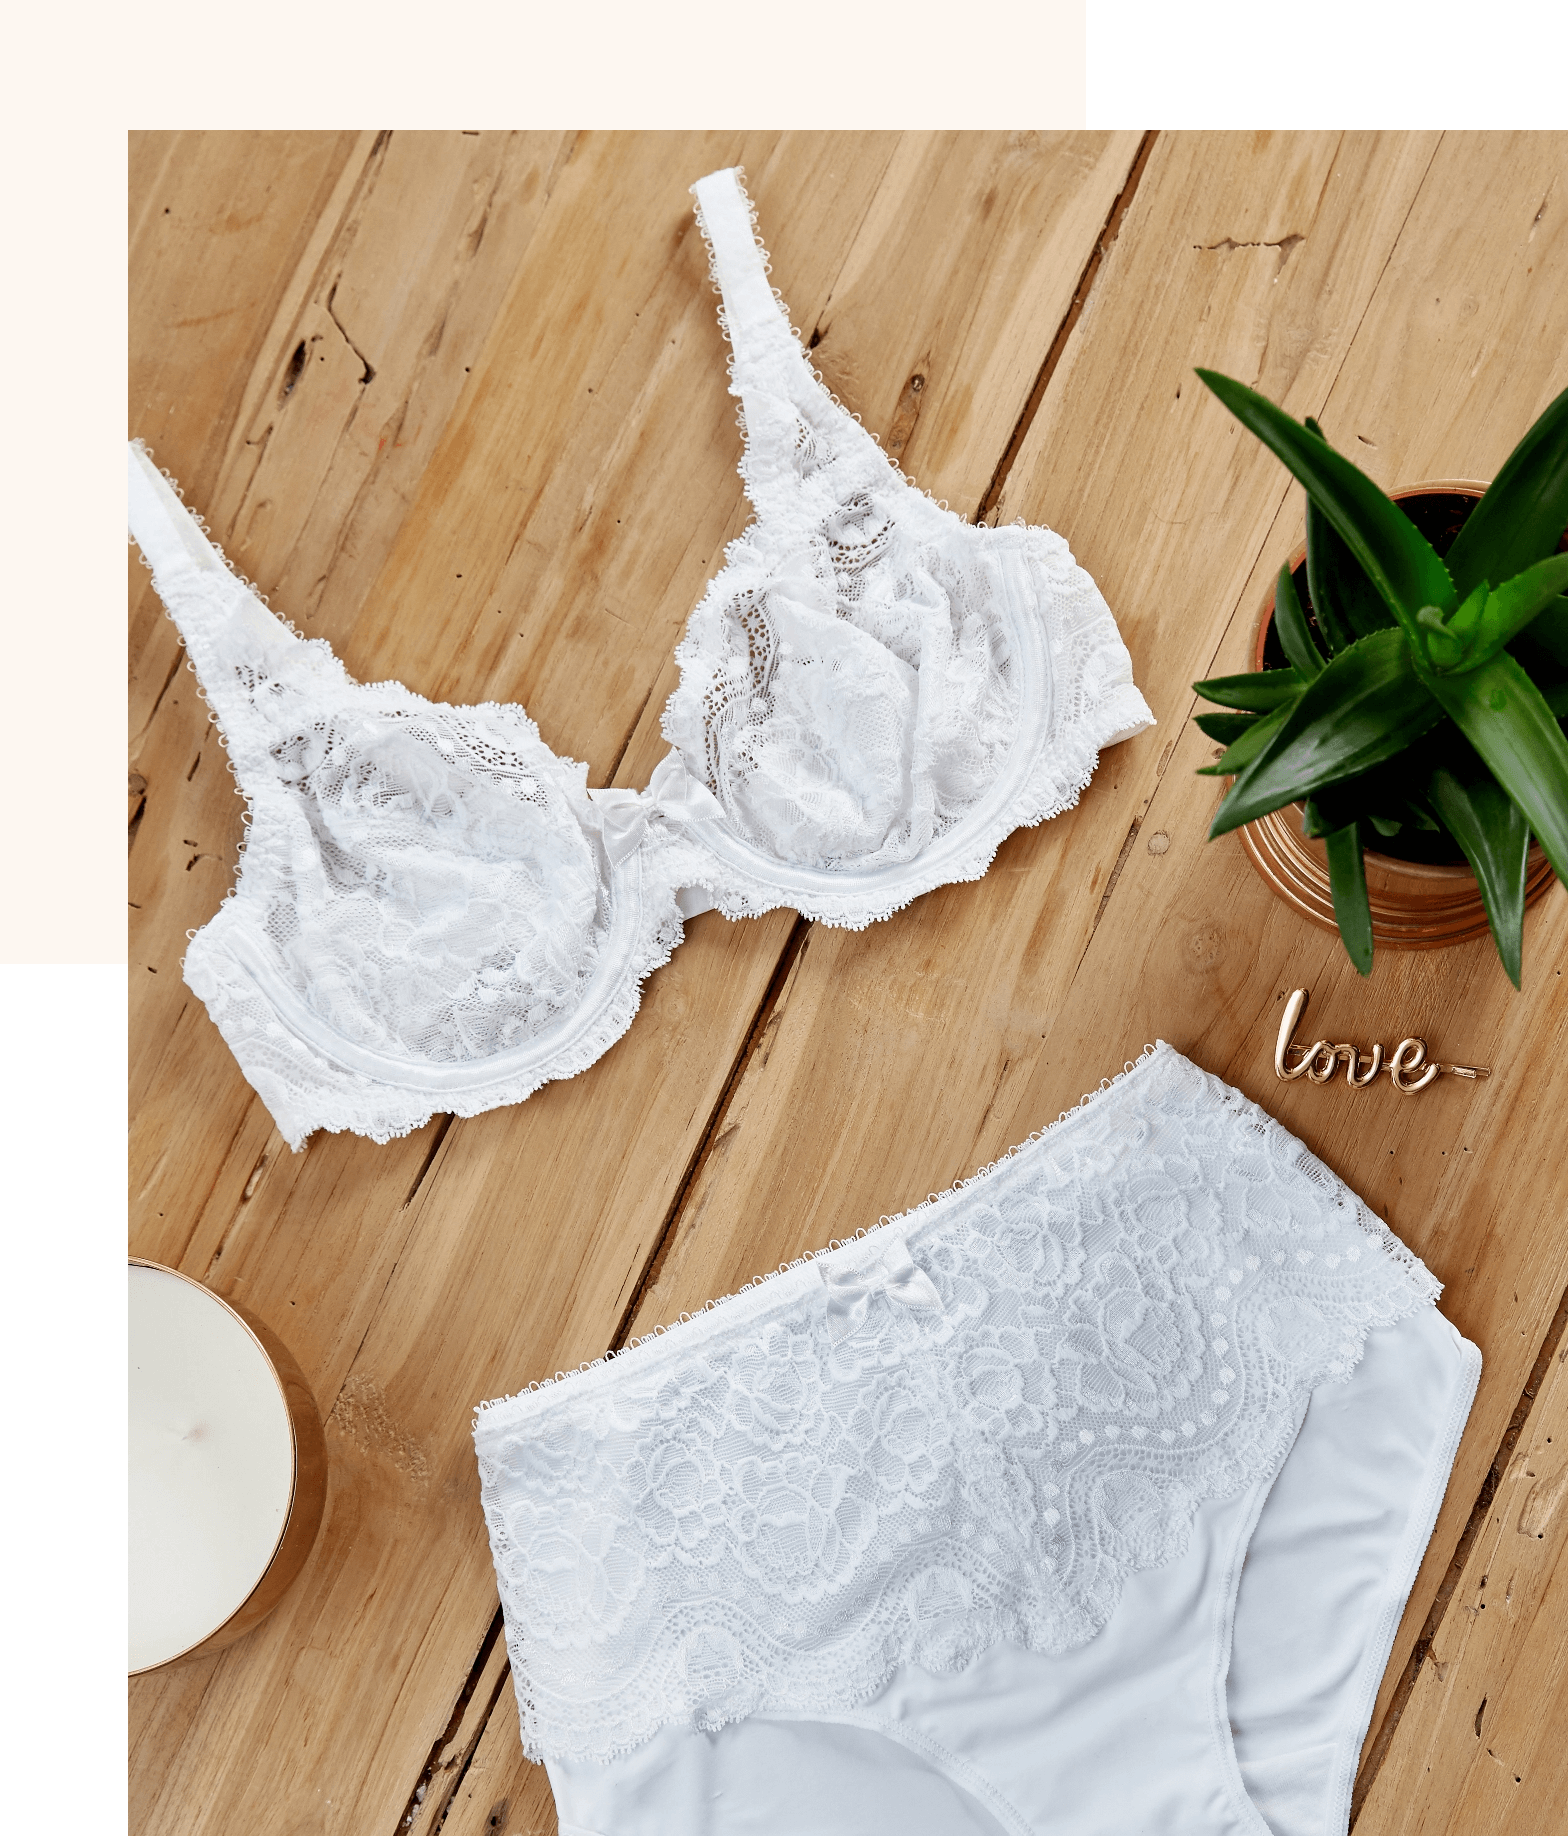 The lingerie that reveals your natural beauty